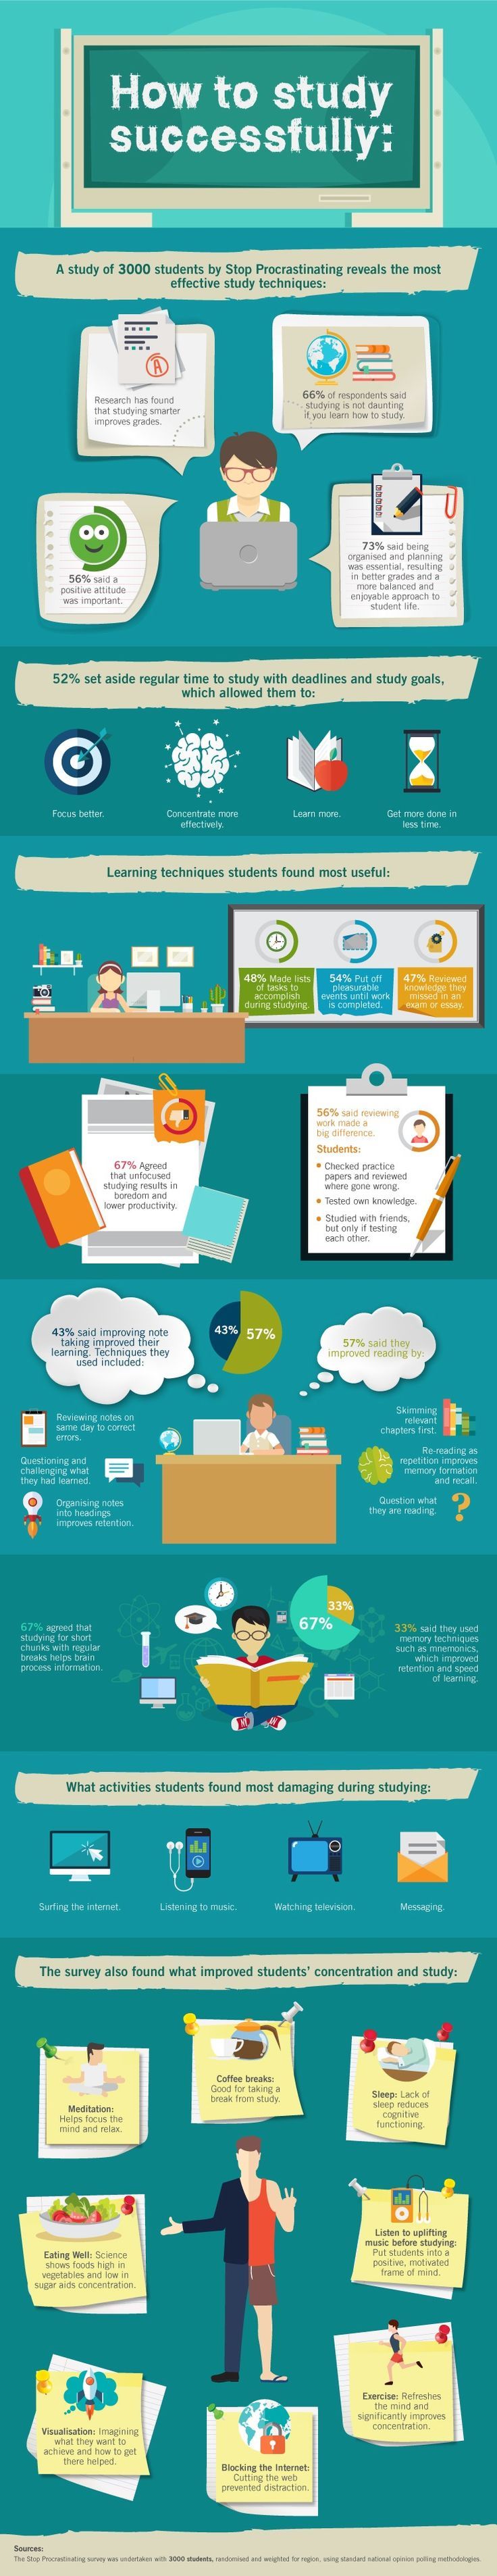 How to Study Successfully Infographic - e-Learning Infographics